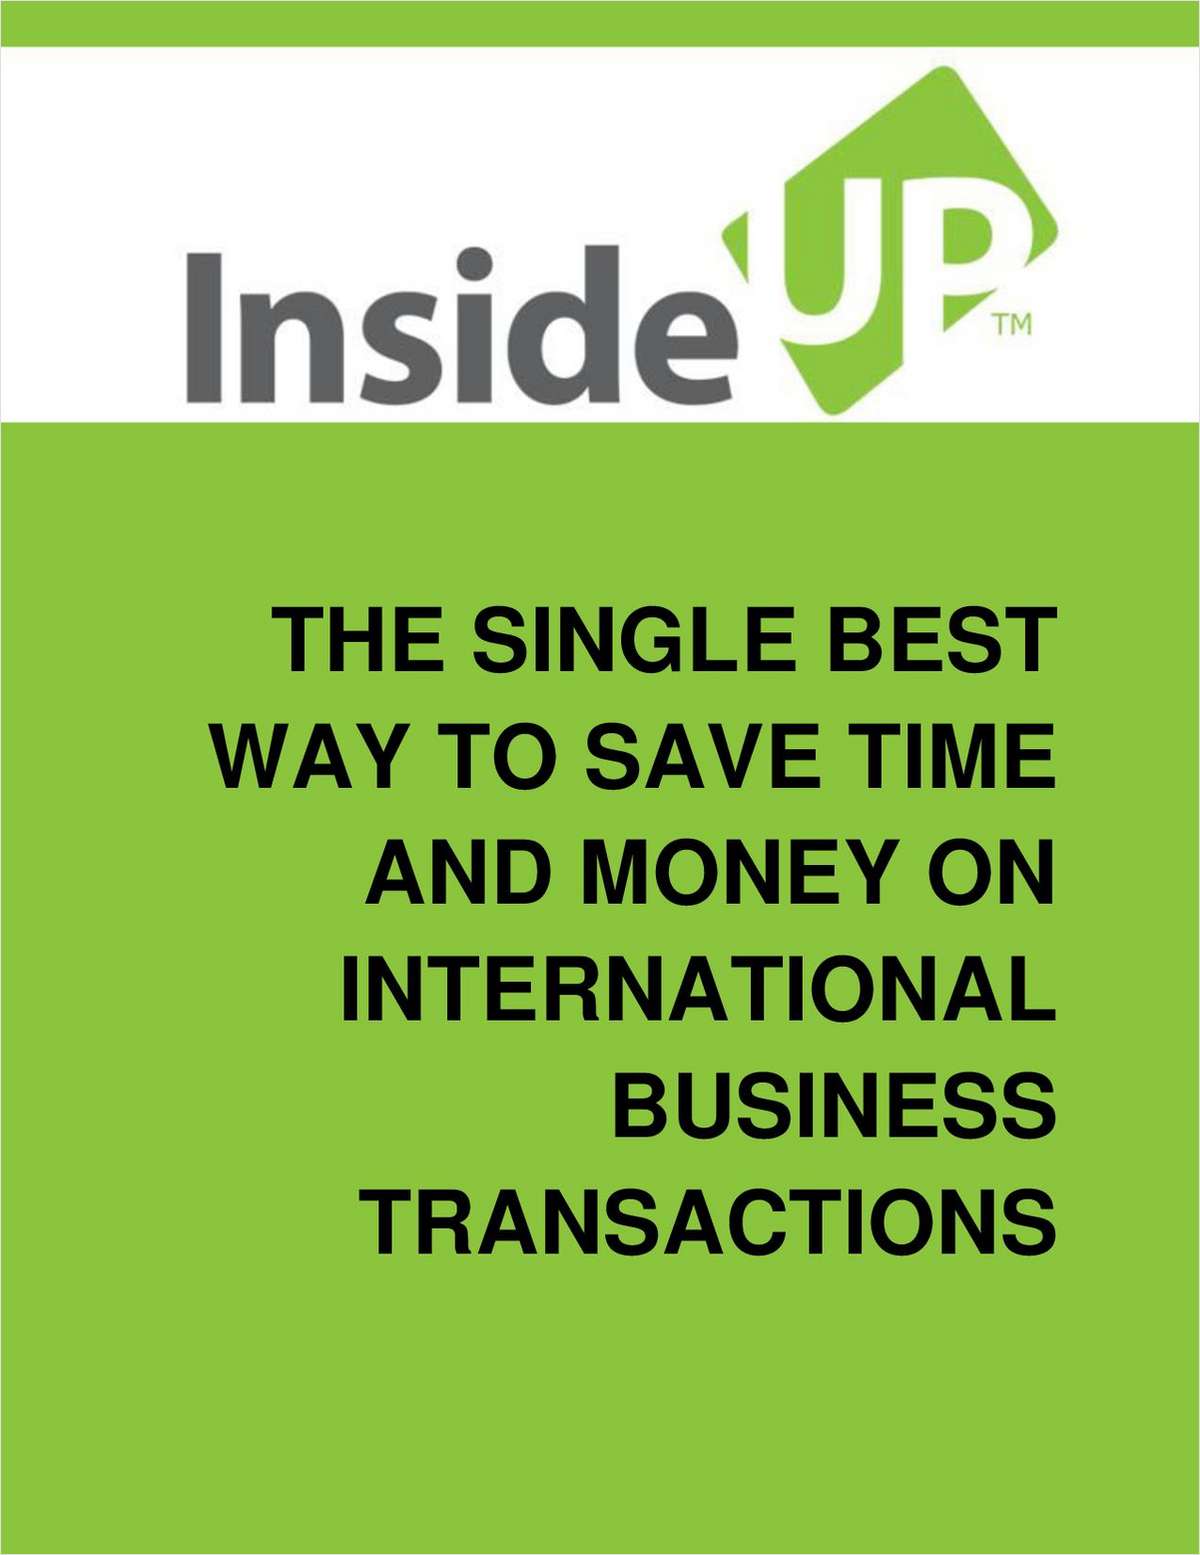 The Single Best Way to Save Time and Money on International Business Transactions